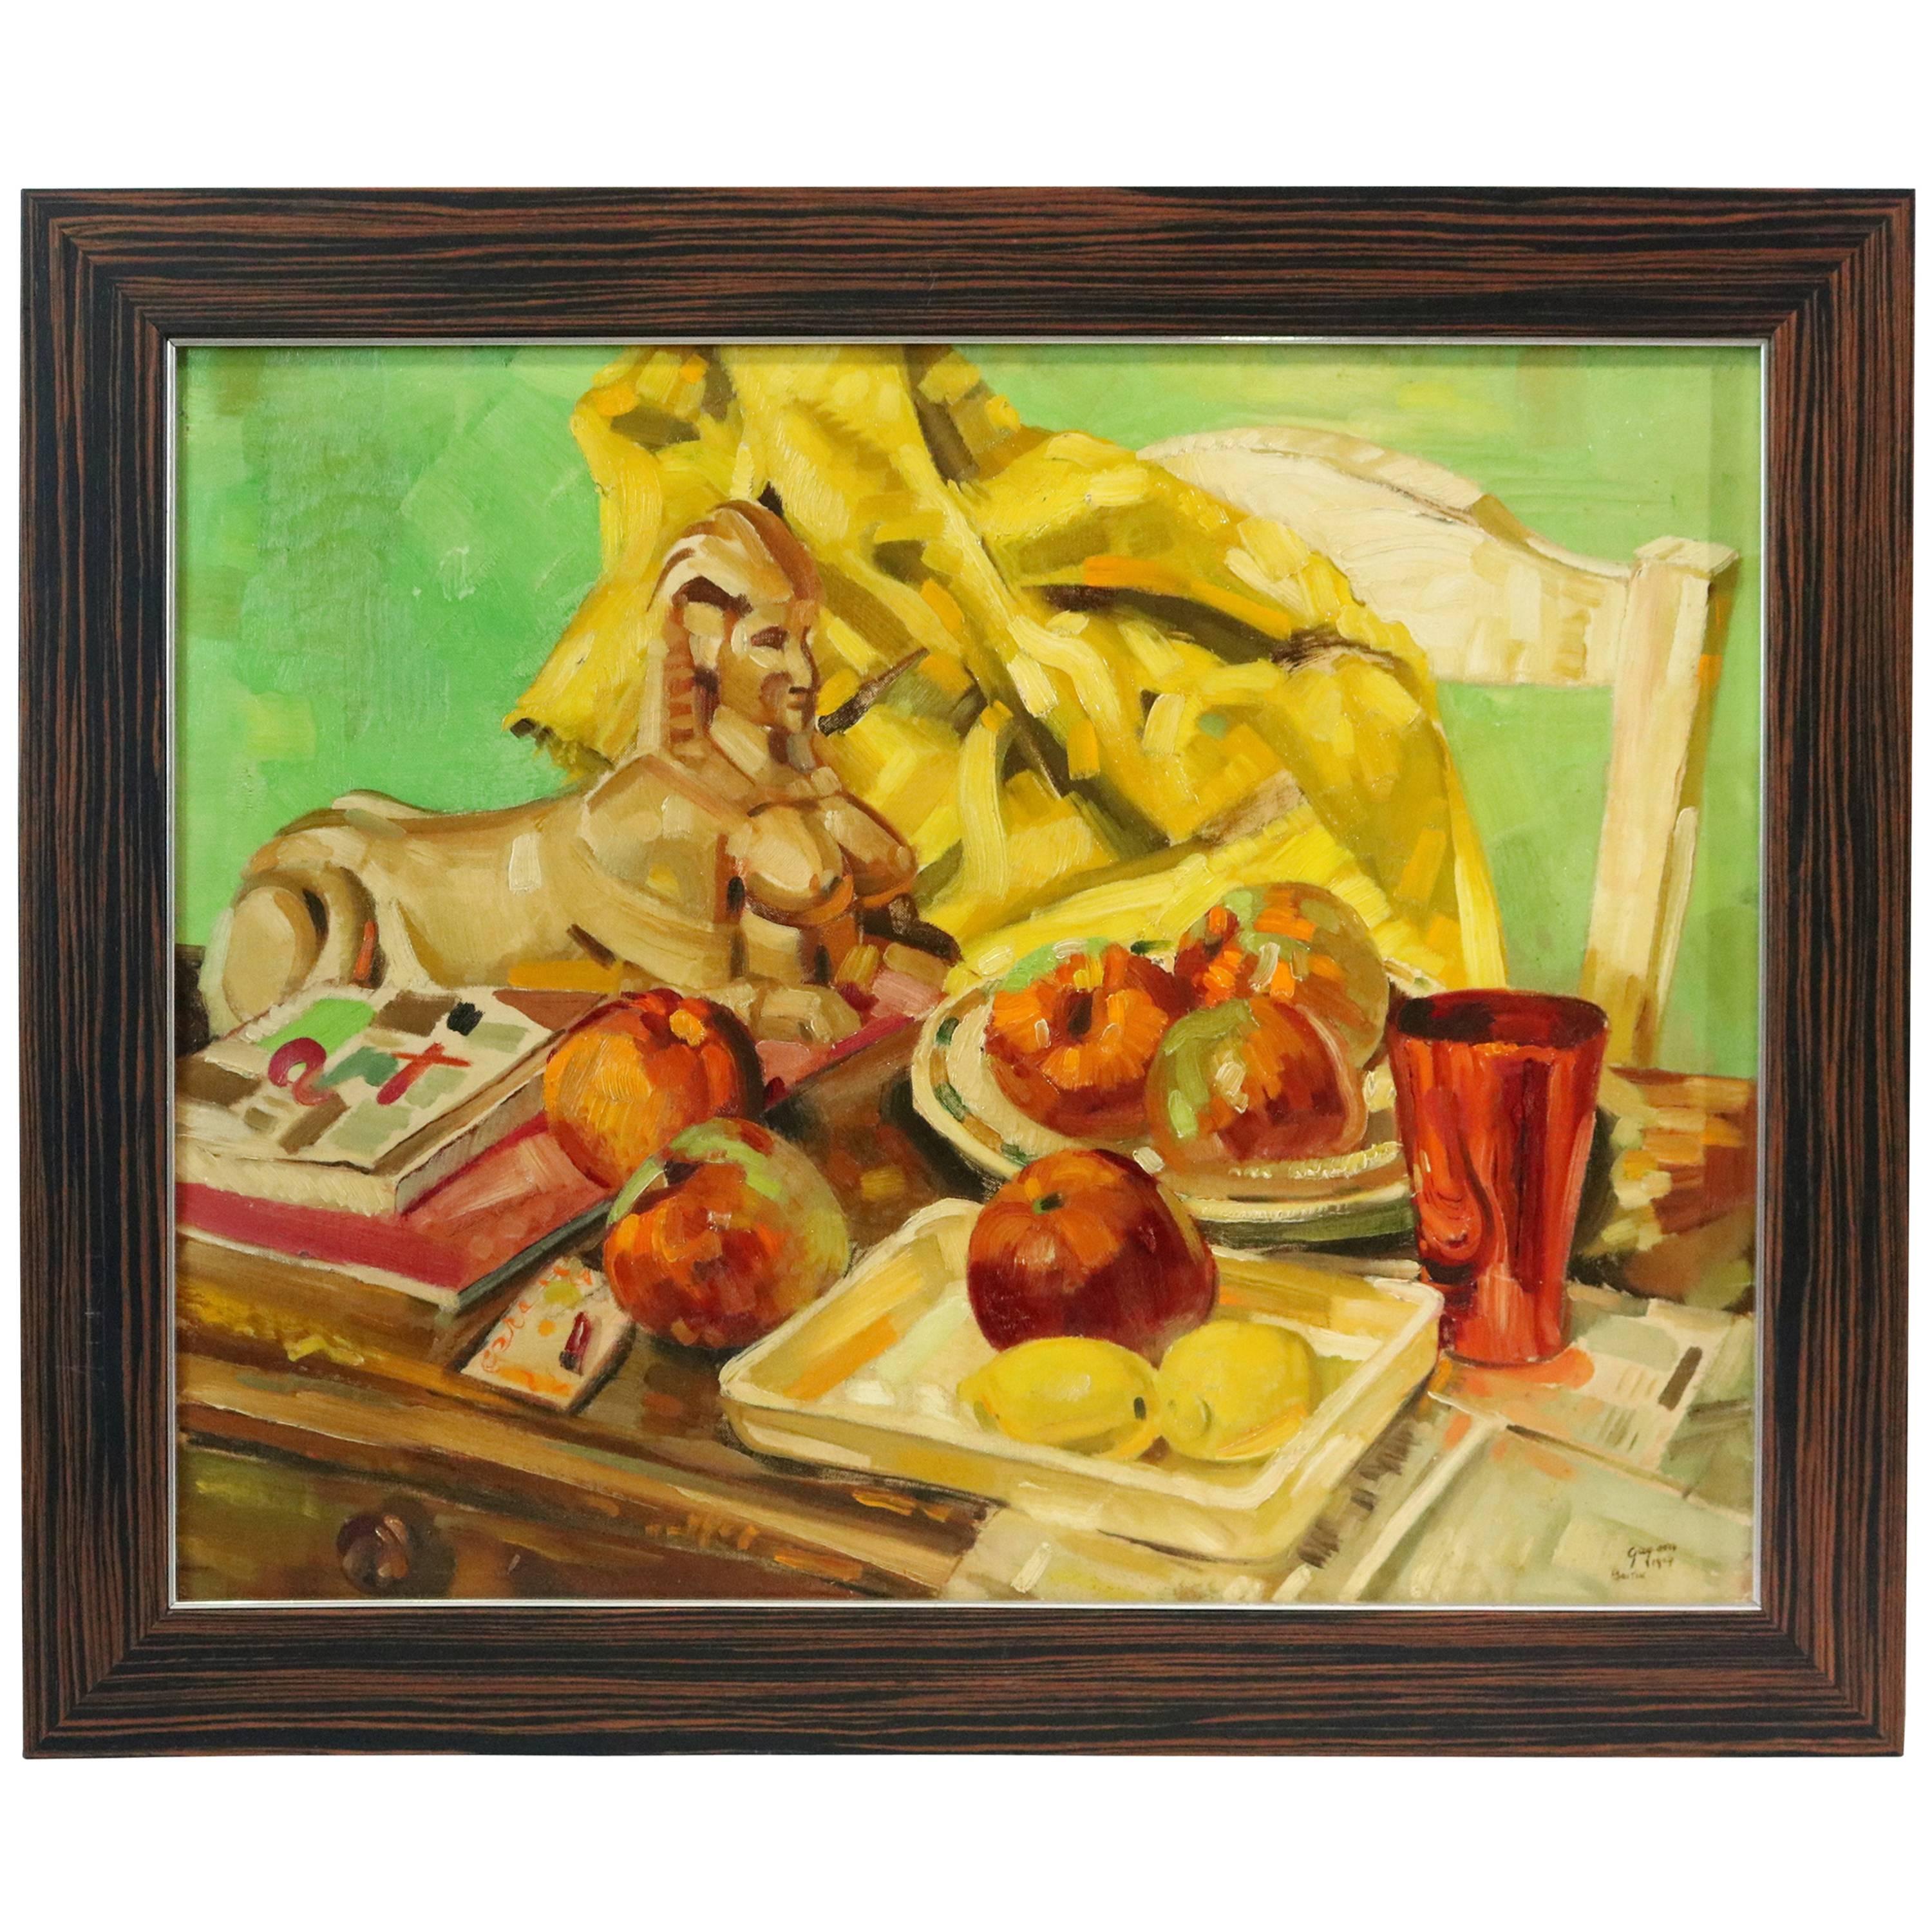 Oil on Masonite Painting by Ralph Gagnon, Titled "Apples in a Still Life"